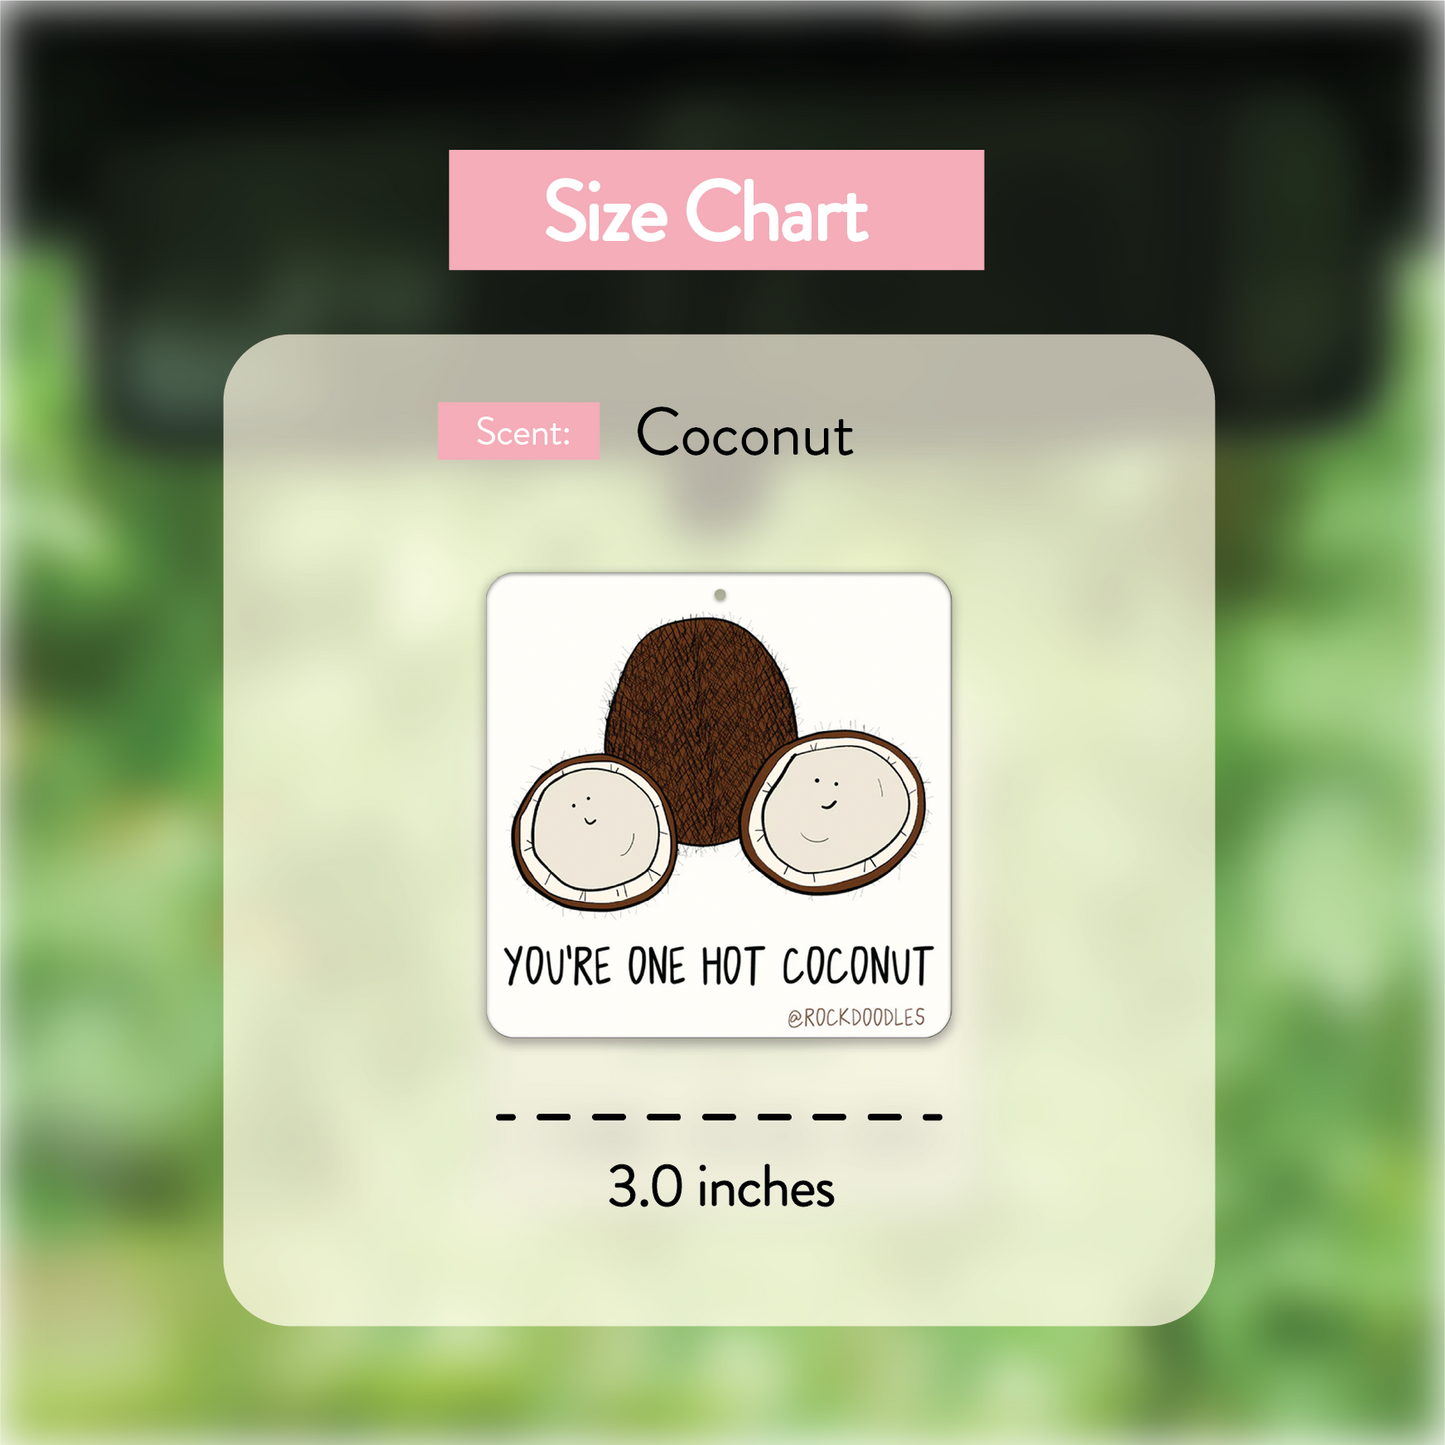 A One Hot Coconut (2-Pack) Punny Air Freshener - Coconut Scent by rockdoodles, featuring a sticker that says you're the hot coconut.